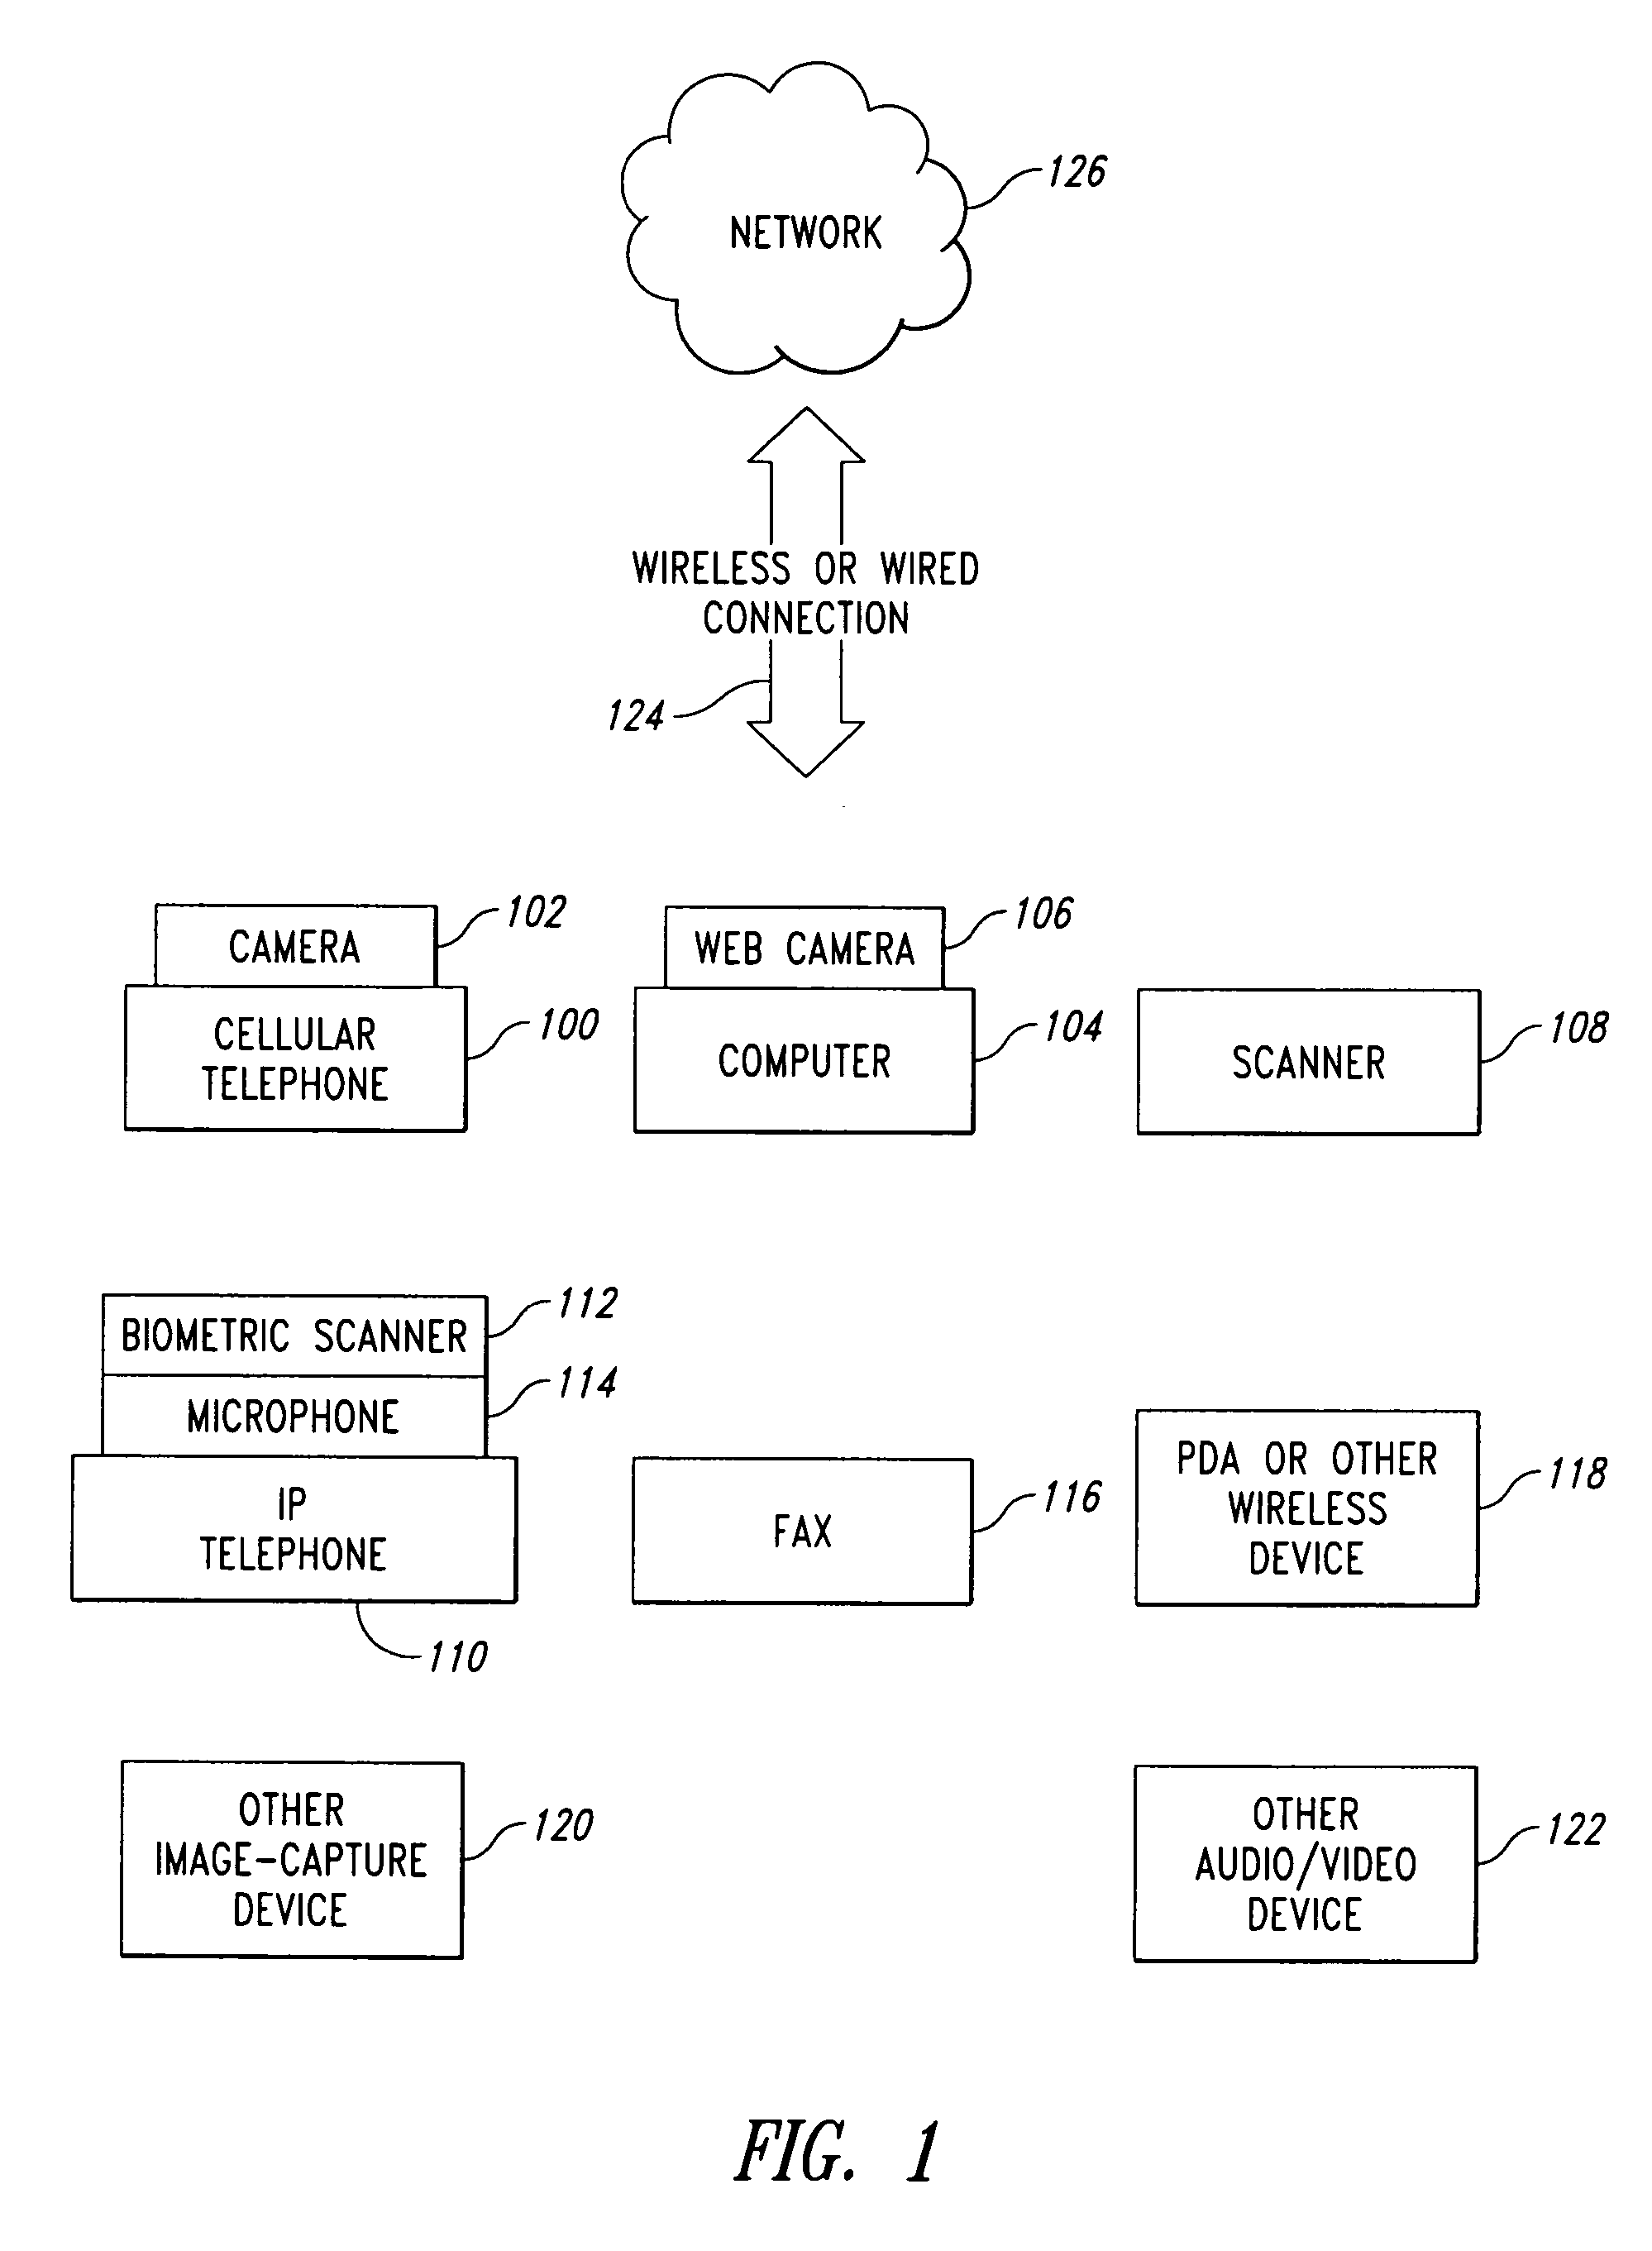 Method, system, apparatus, and machine-readable medium for use in connection with a server that uses images or audio for initiating remote function calls